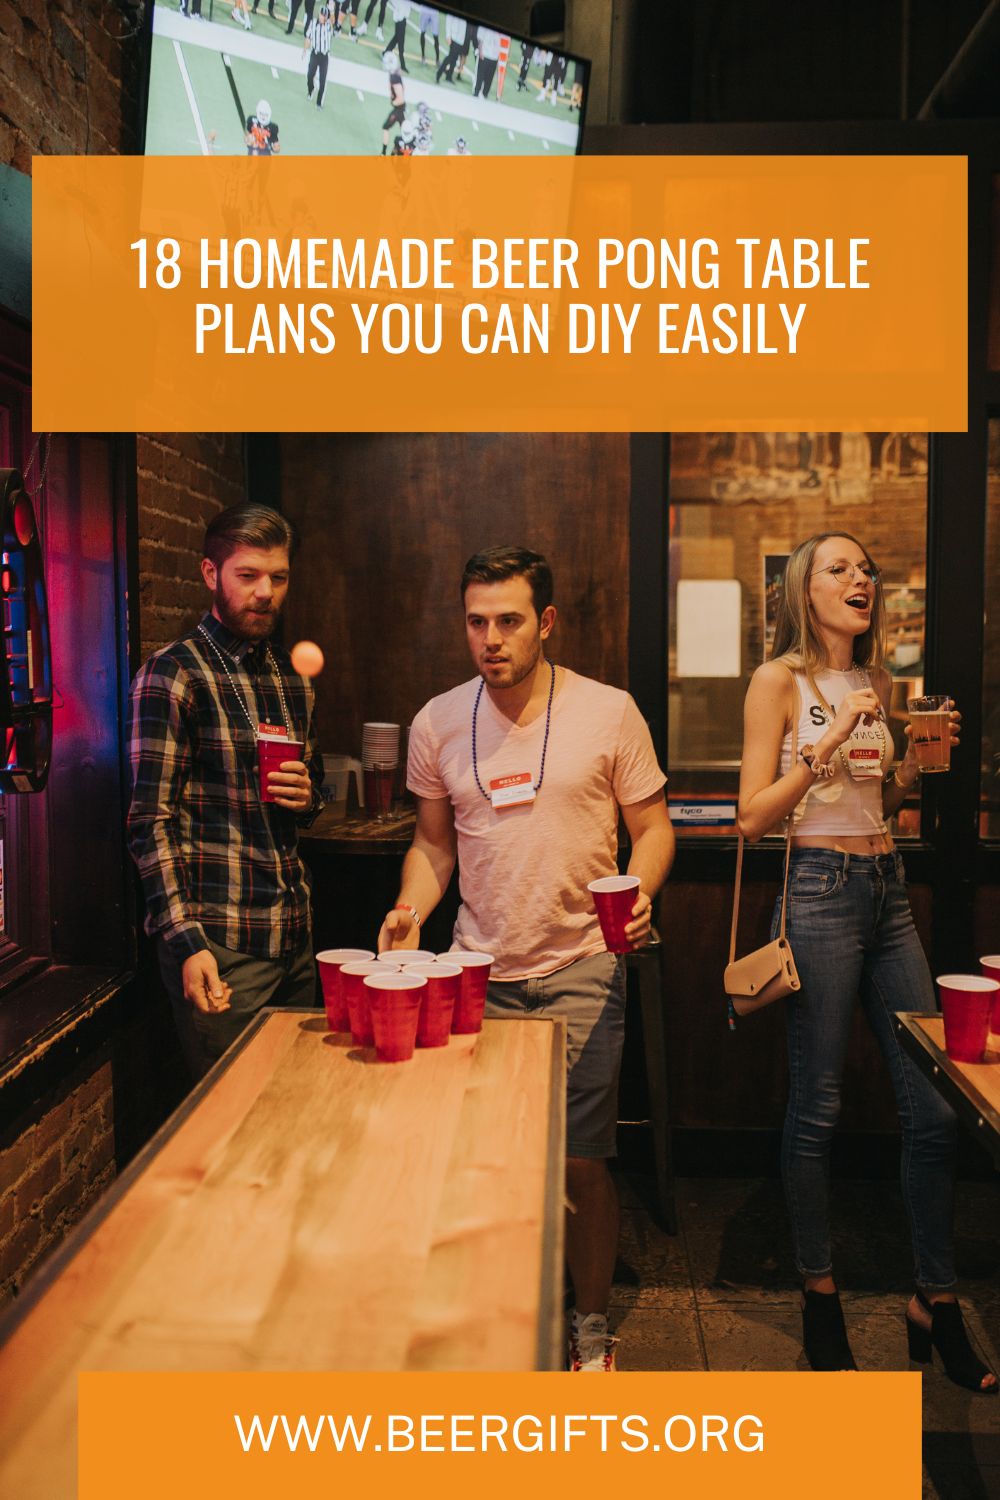 18 Homemade Beer Pong Table Plans You Can DIY Easily 1